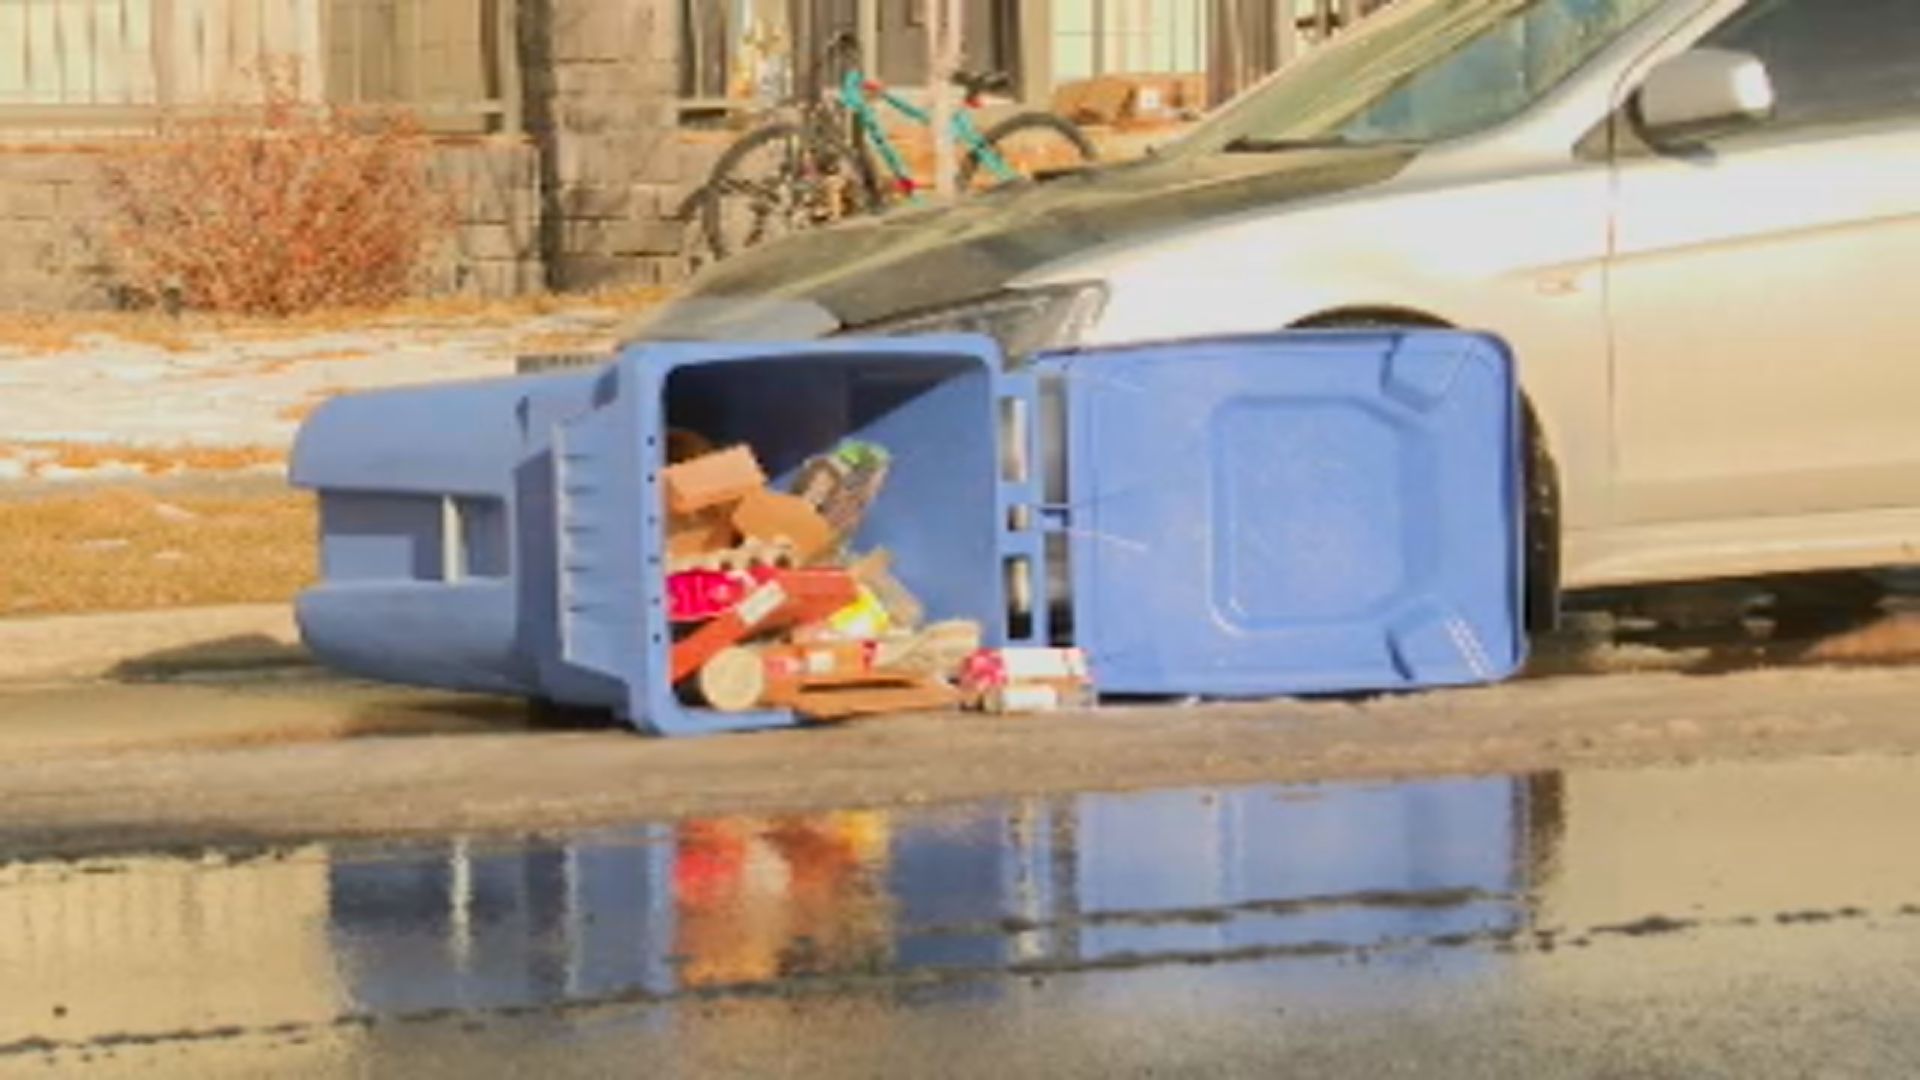 Pilot project aims to keep Lethbridge bins standing